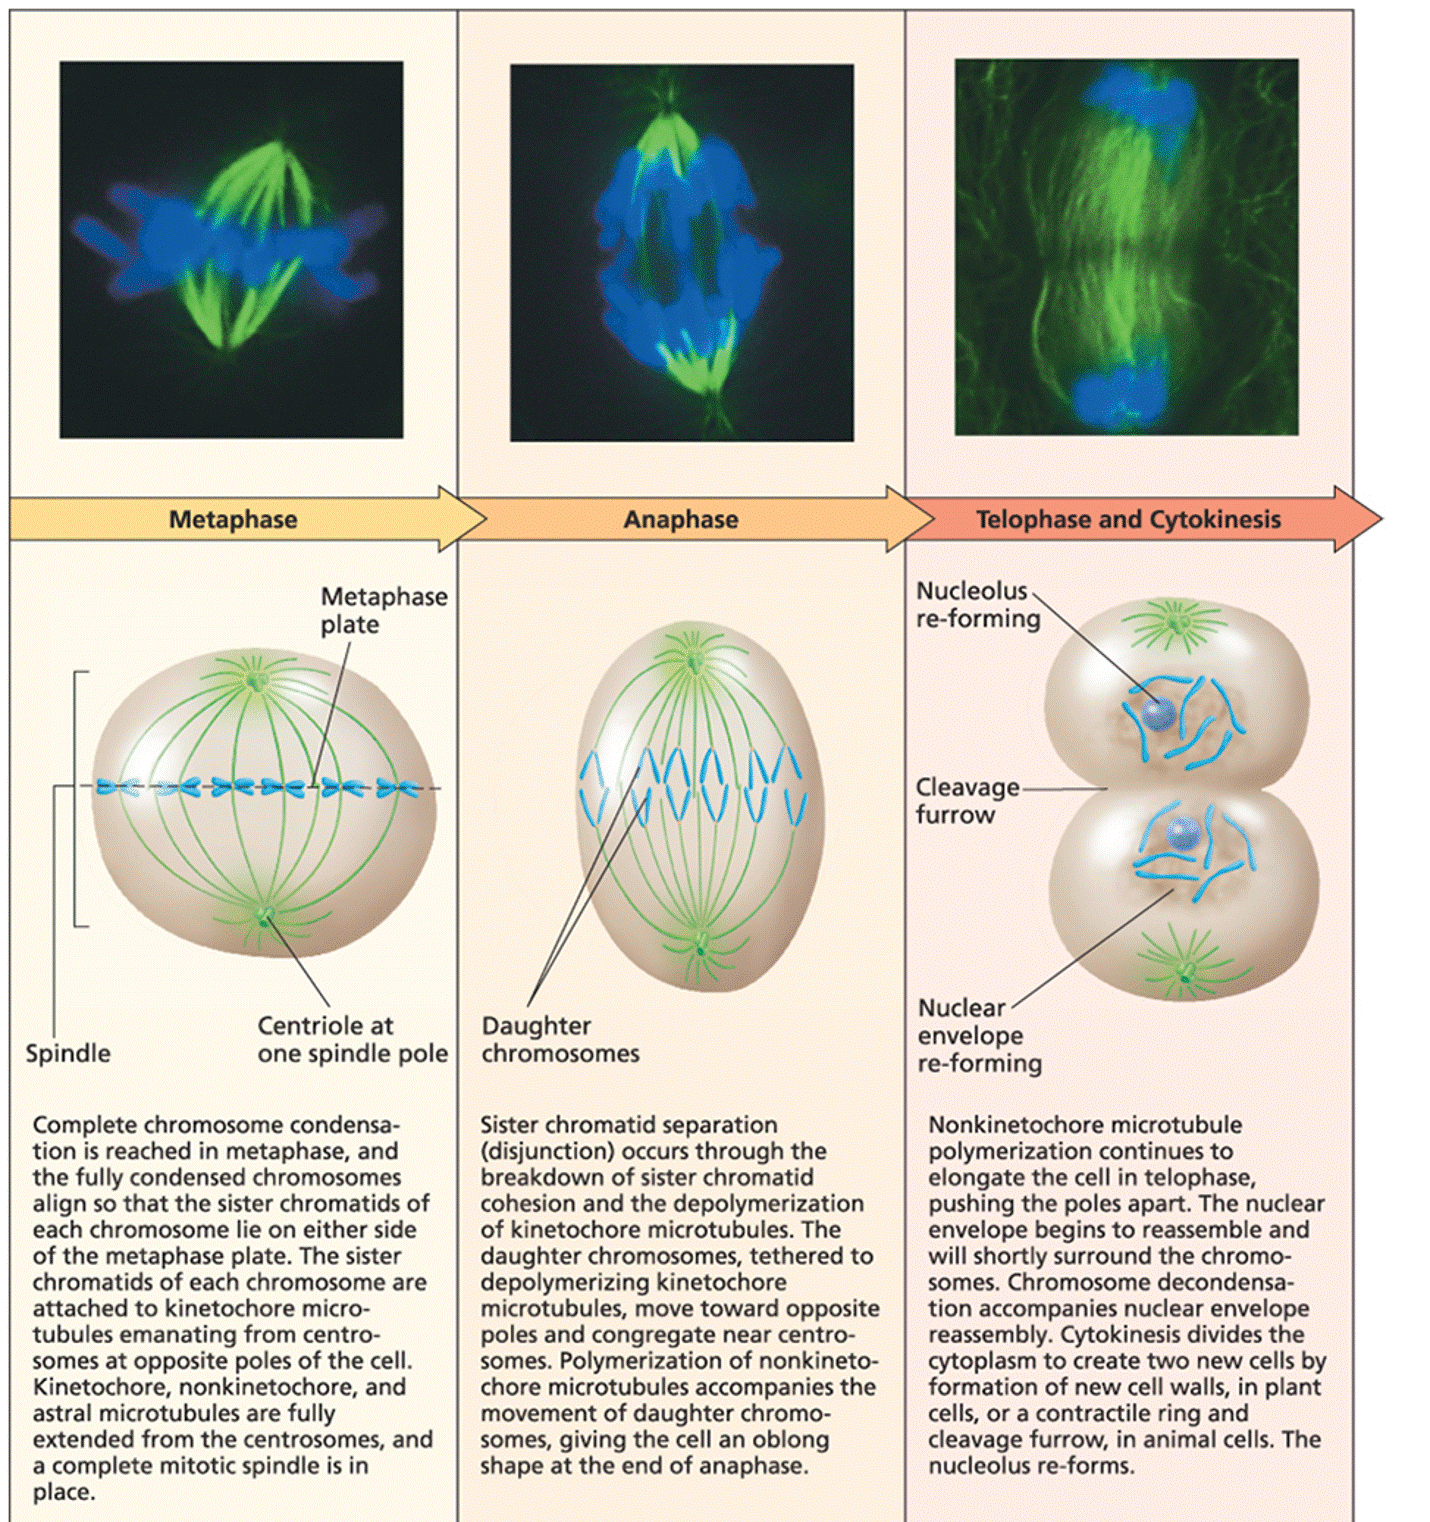 Interphase and the five stages of mitosis (2 of 2)